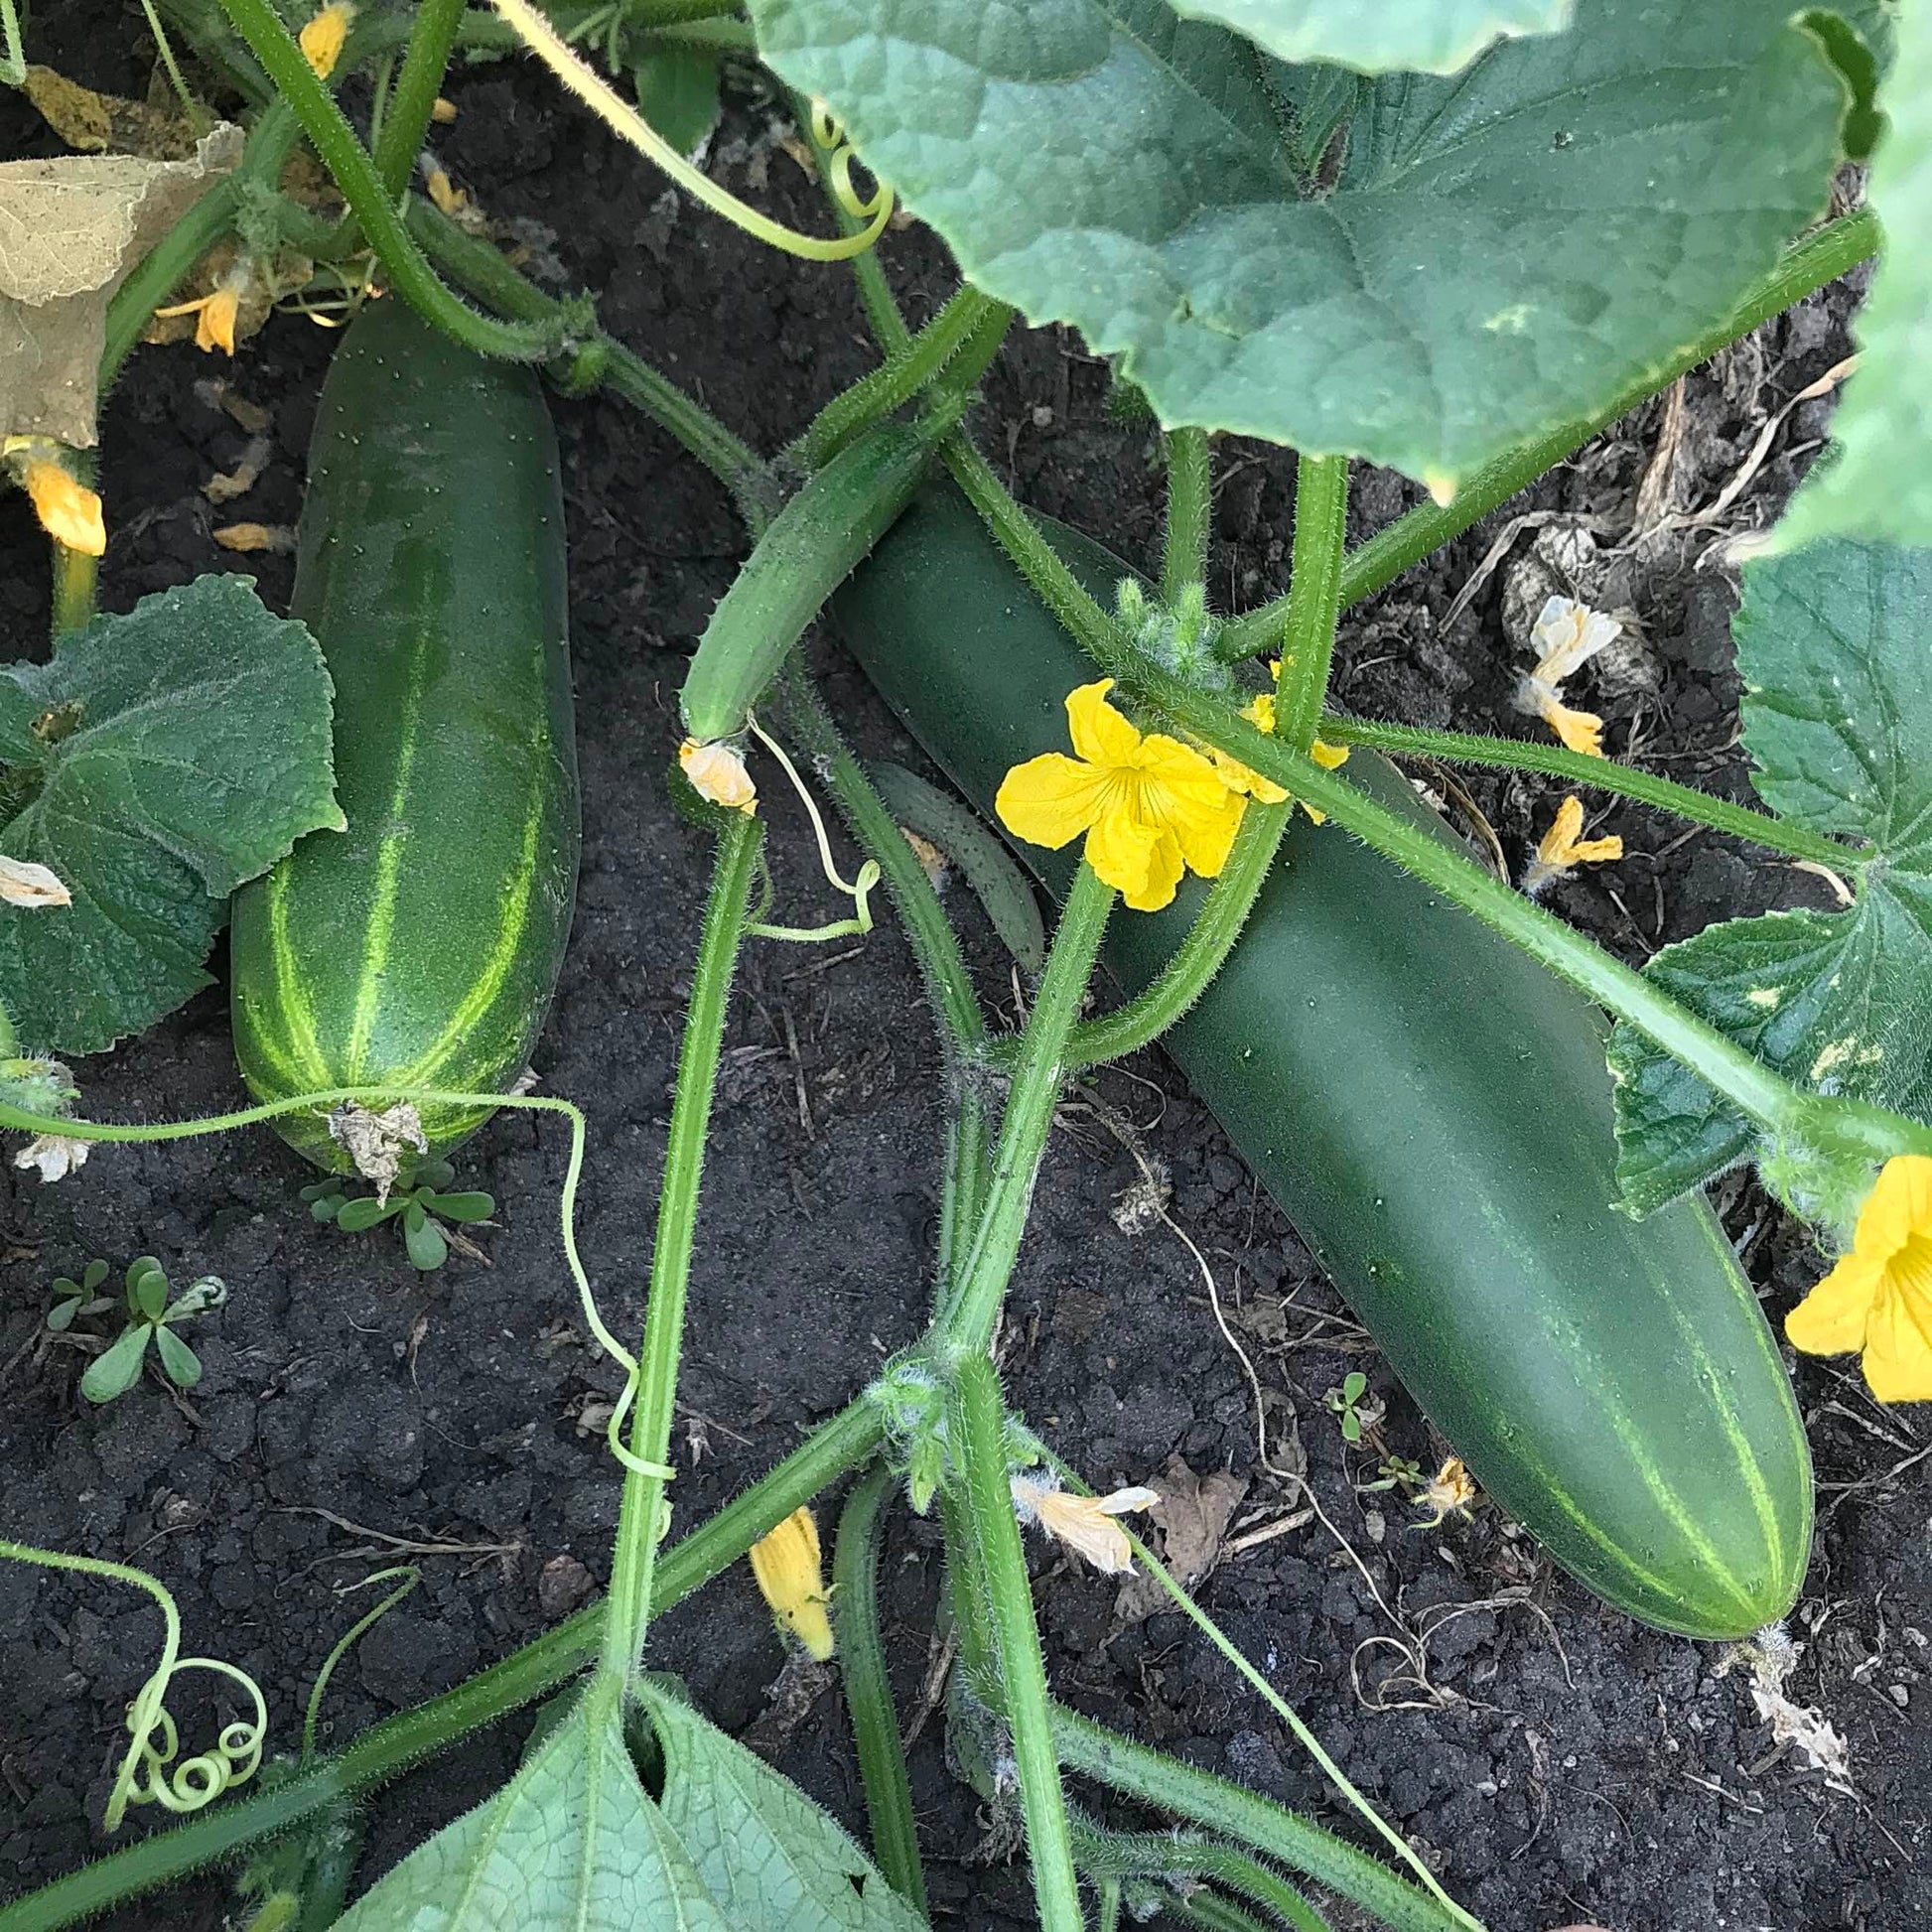 Two slicer cucumbers peeking out from a tangle of vines and leaves.